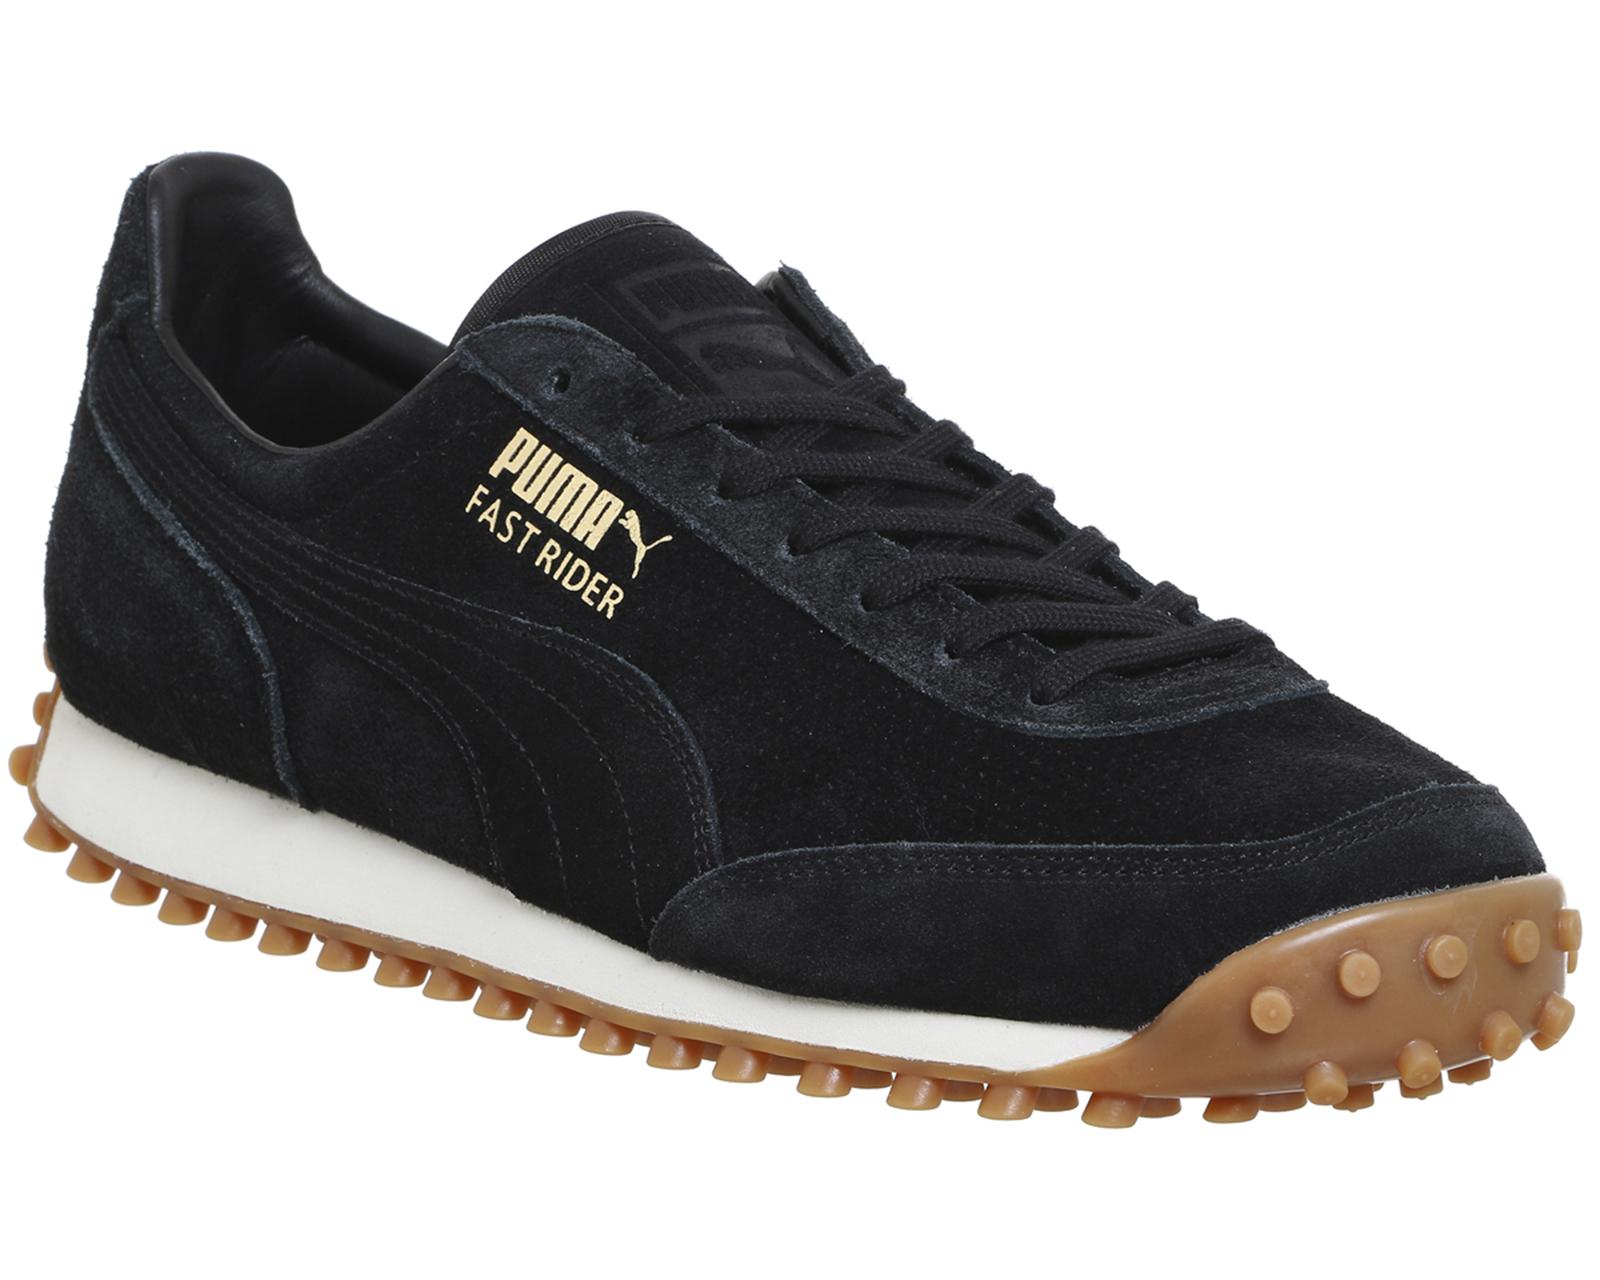 PUMA Fast Rider Trainers in Black for Men - Lyst